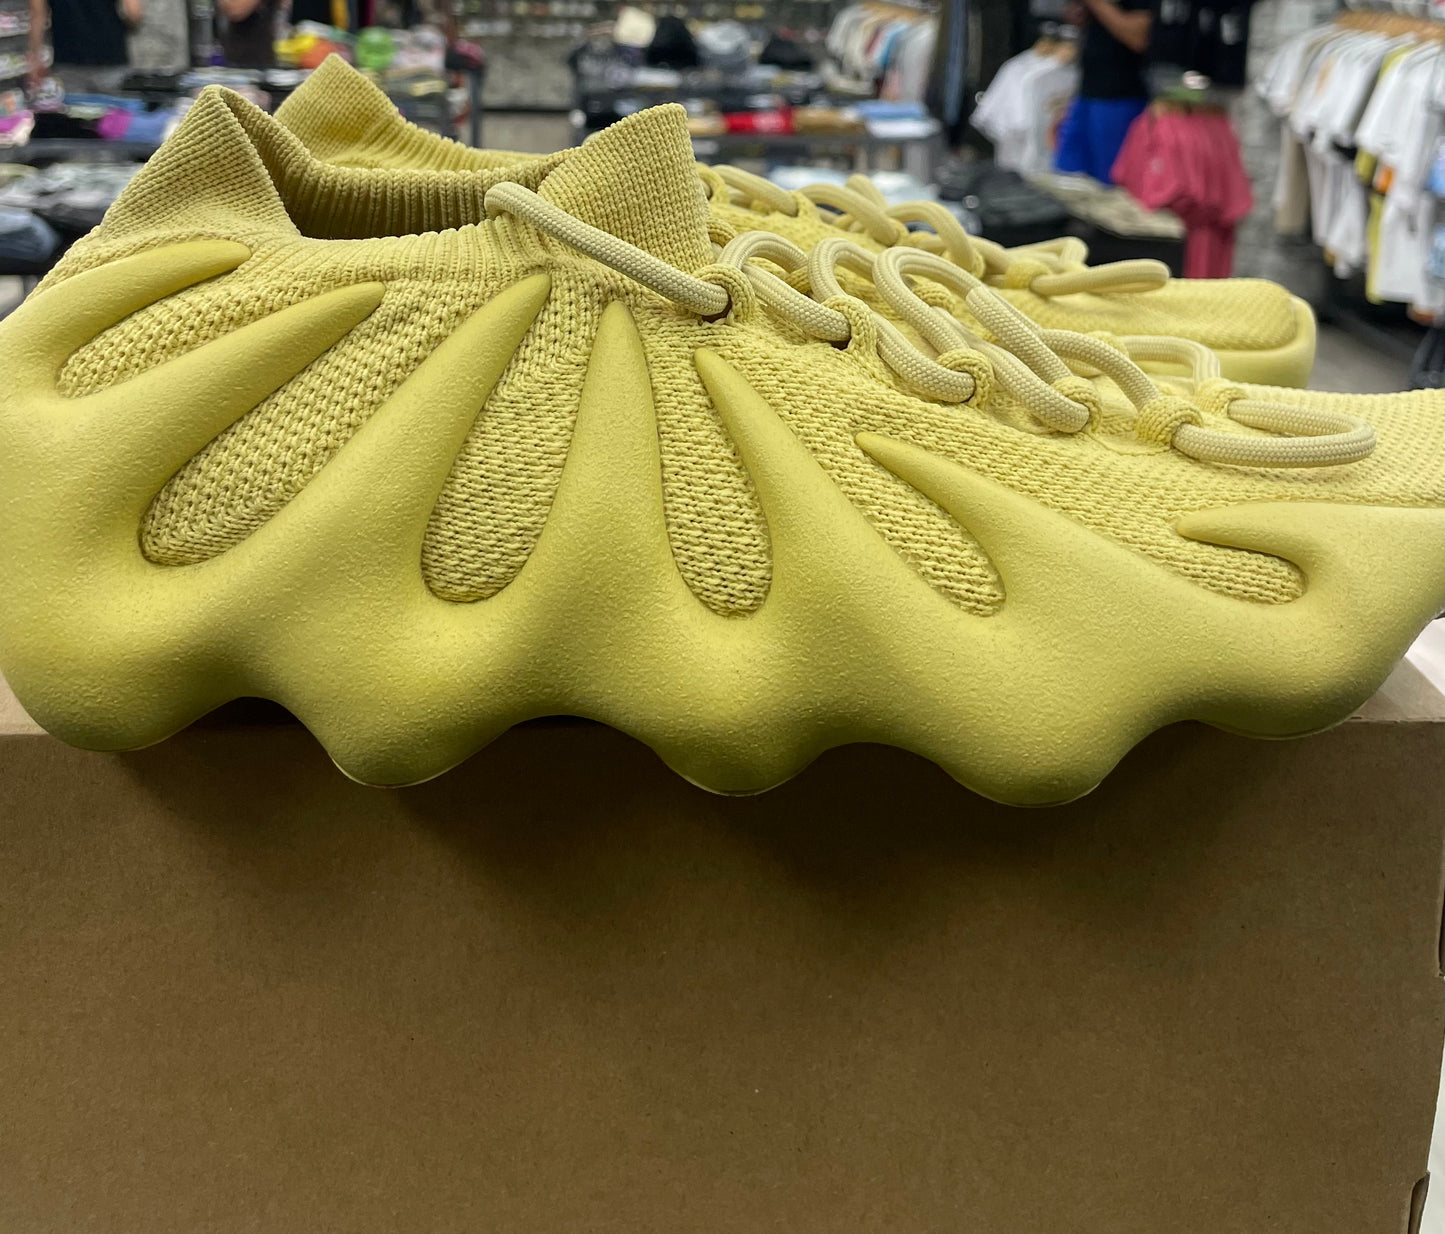 Yeezy 450 "Sulfur" *Size 10.5 Preowned*